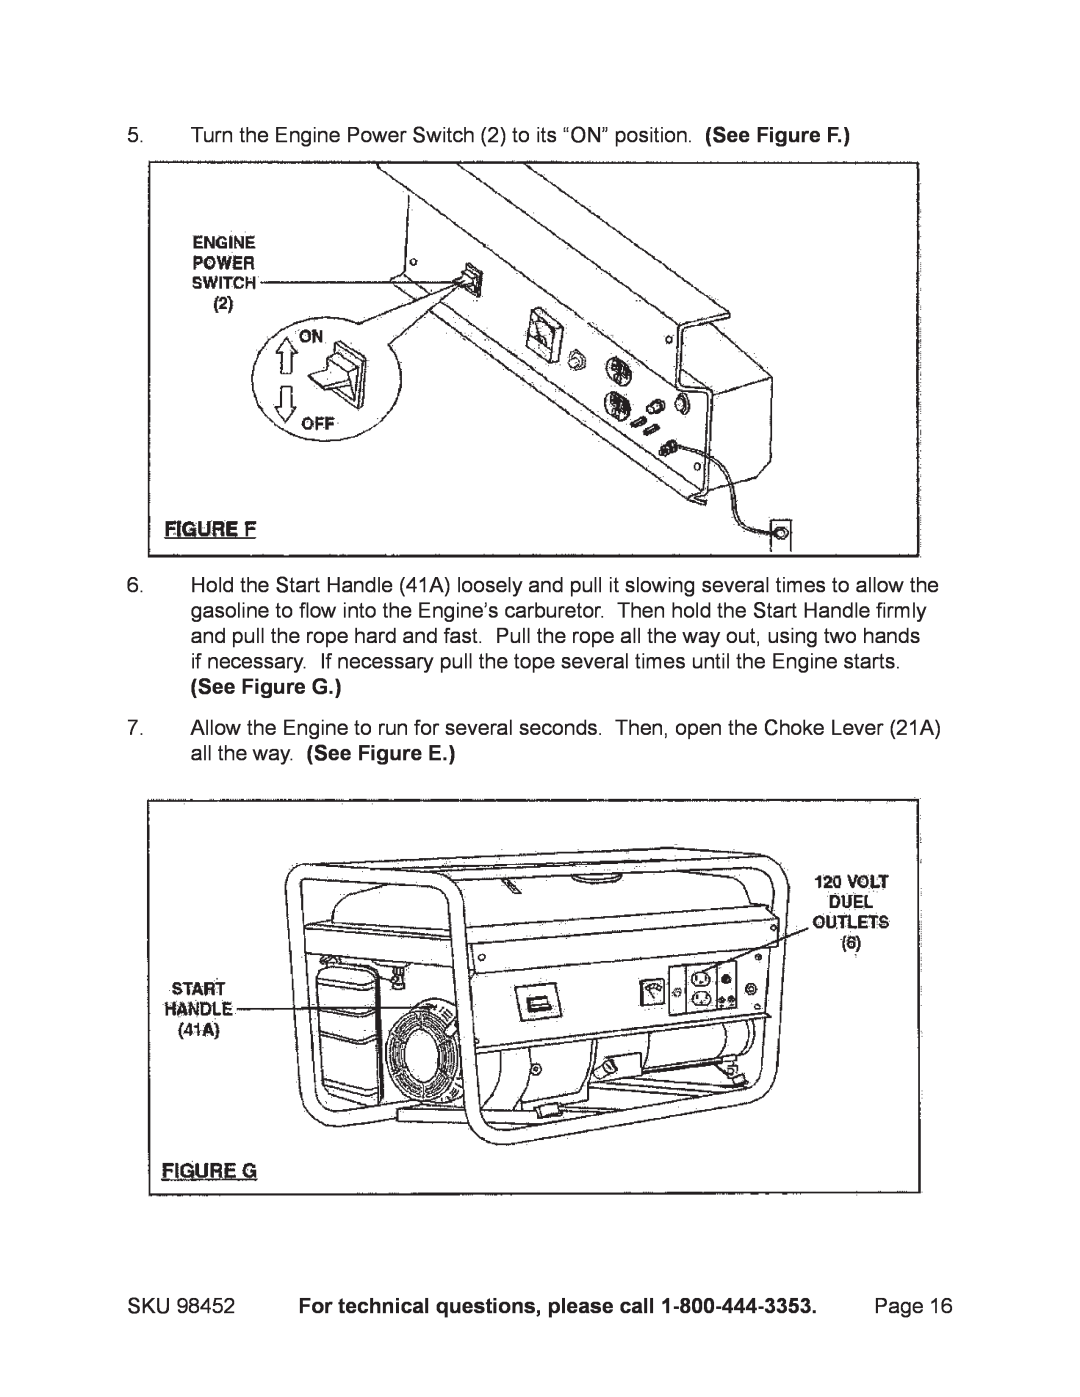 Chicago Electric 98452 operating instructions See Figure G, For technical questions, please call 